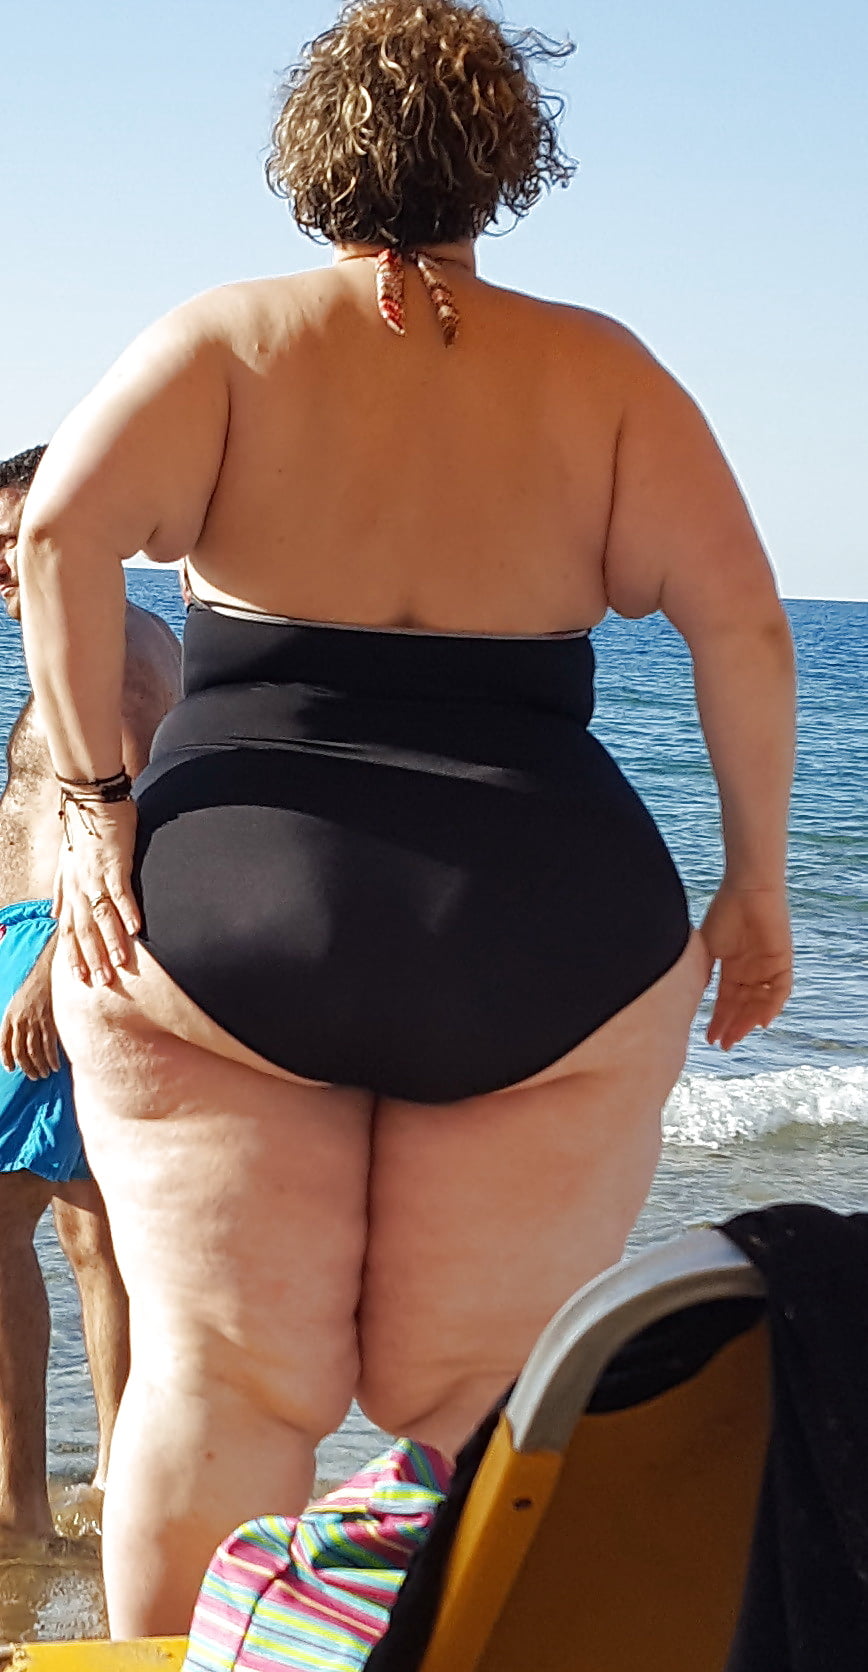 Ssbbw Mature Amateur Spied On The Beach In Swimsuit Porn Gallery 111444964